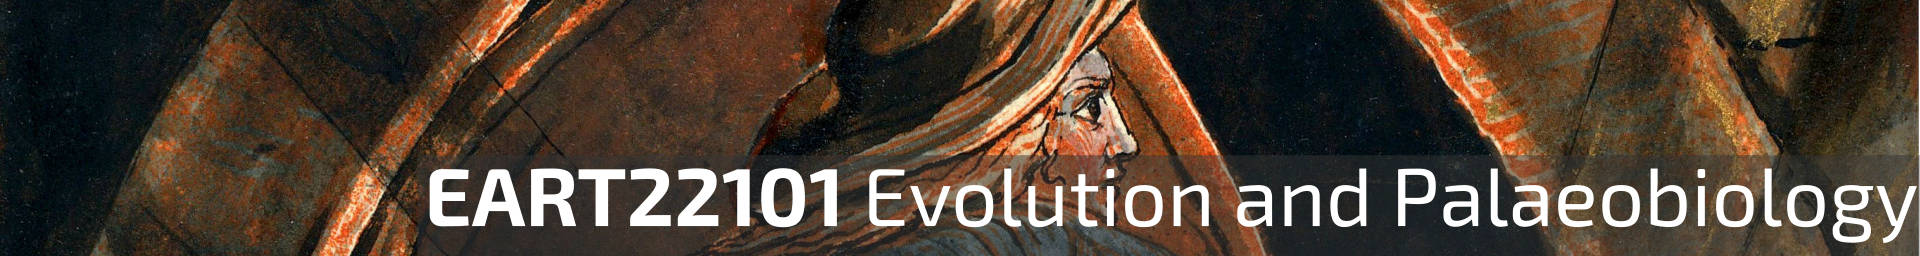 Click to visit website for EART22101 Evolution and Palaeobiology teaching site